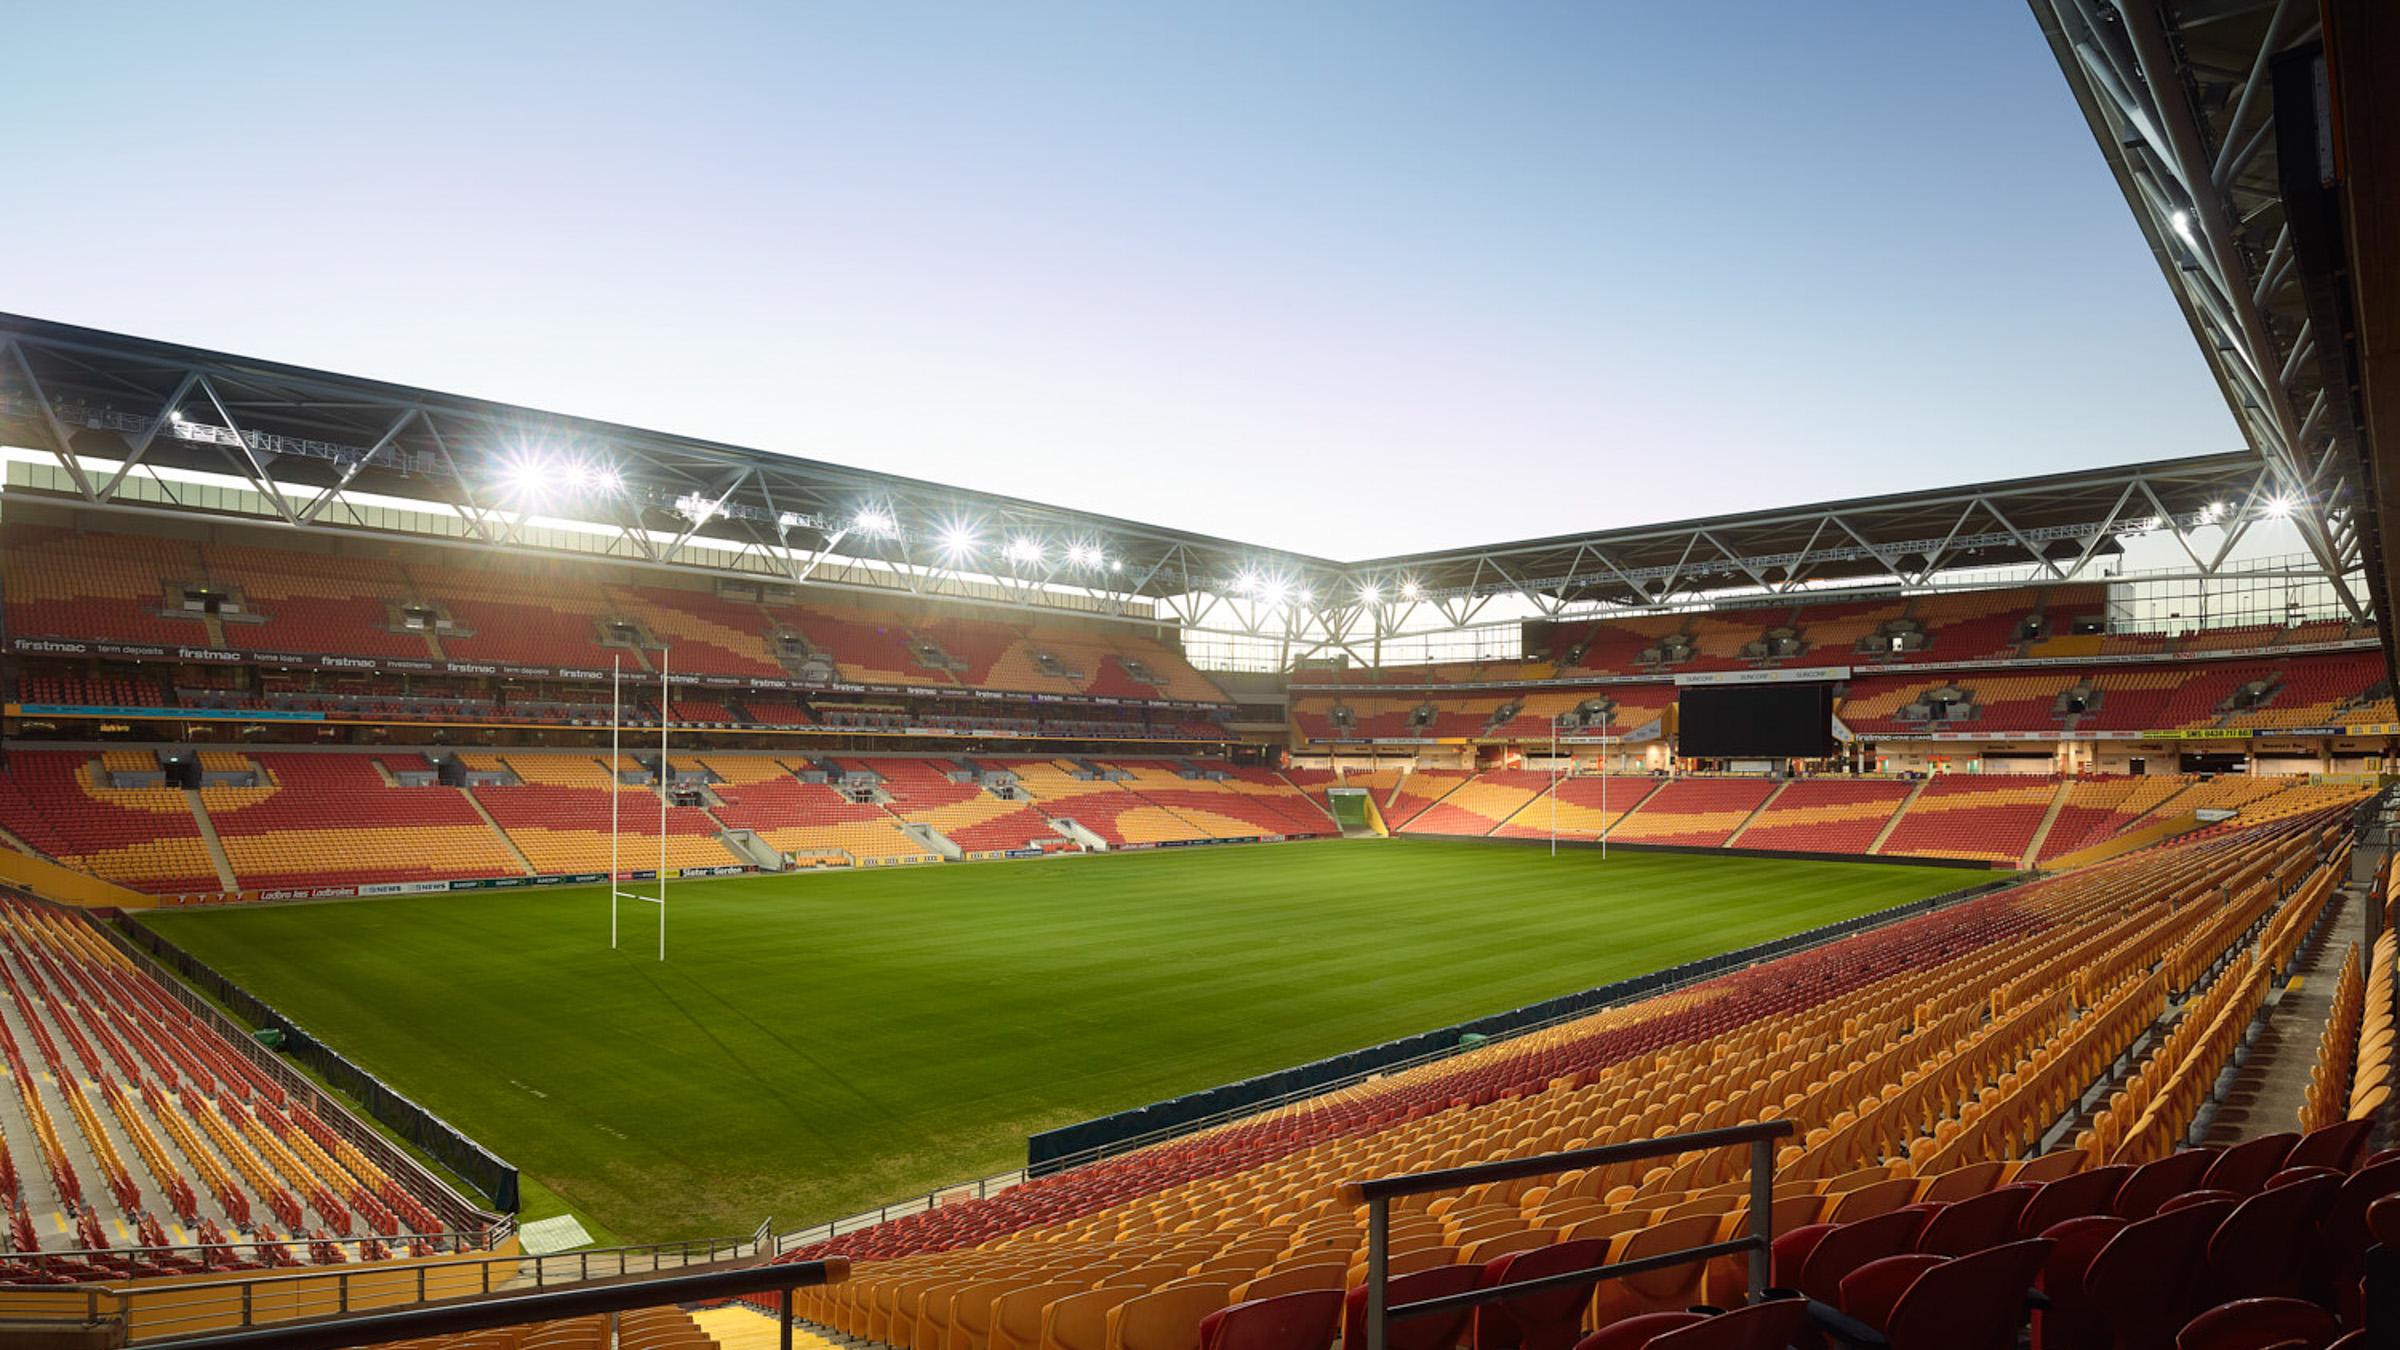 Inside view of empty Suncorp stadium in the afternoon, with the bright stadium lights on